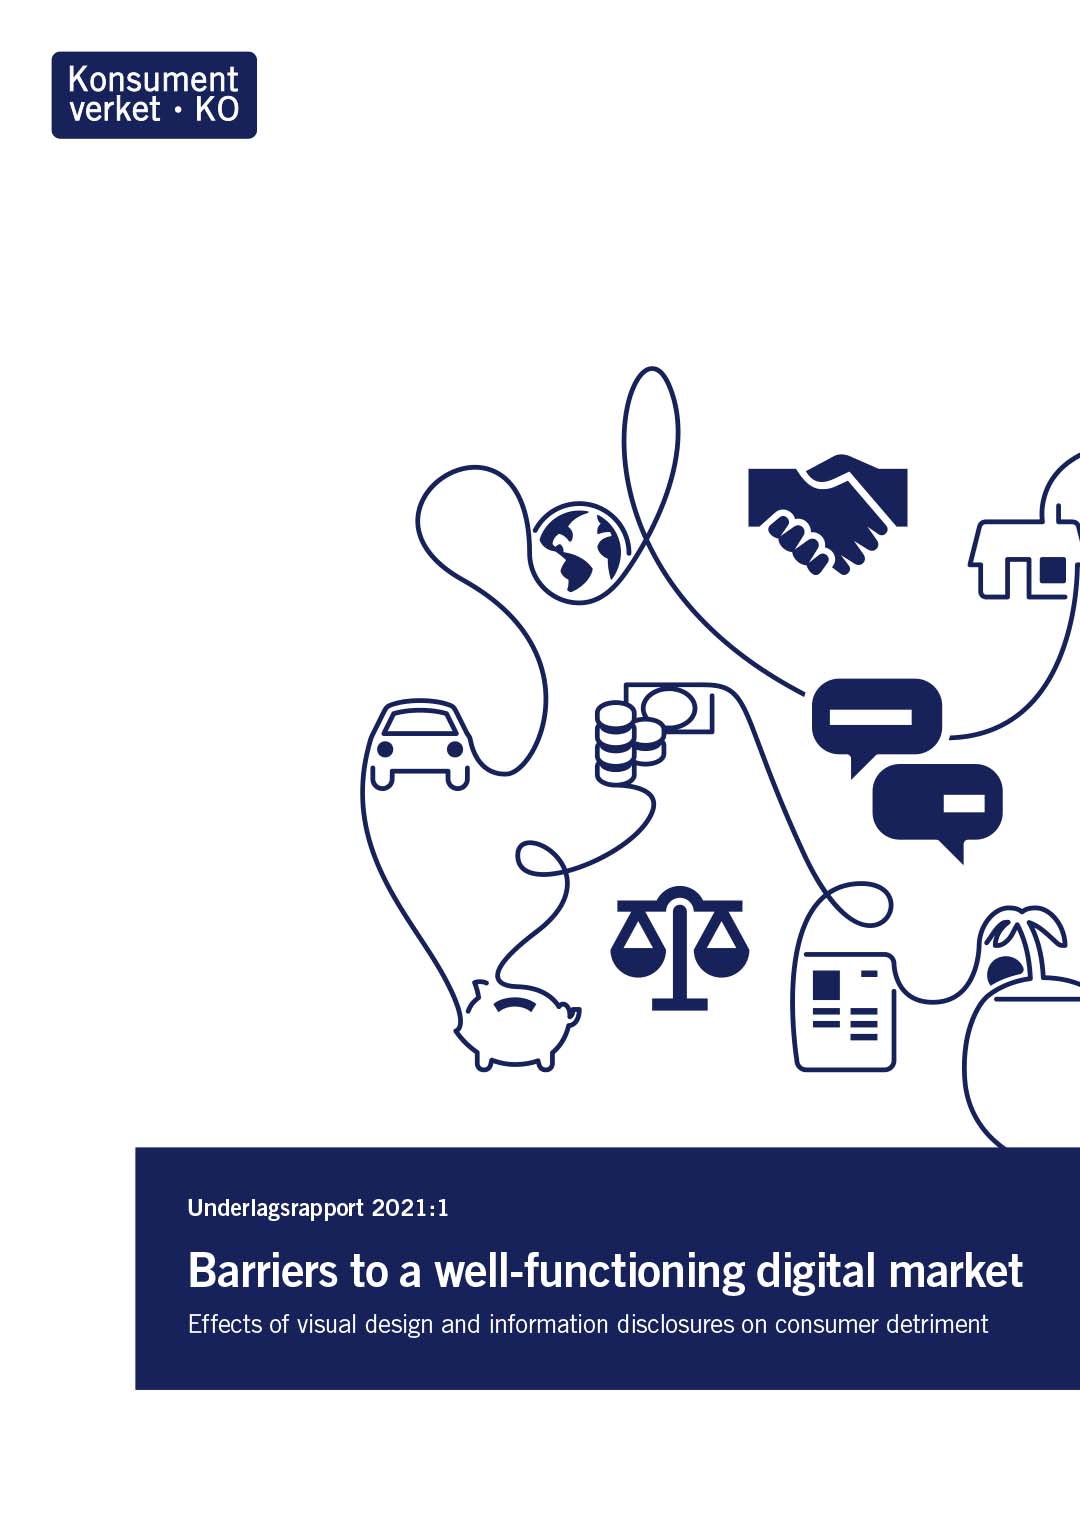 Underlagsrapport 2021:1 Barriers to a well-functioning digital market